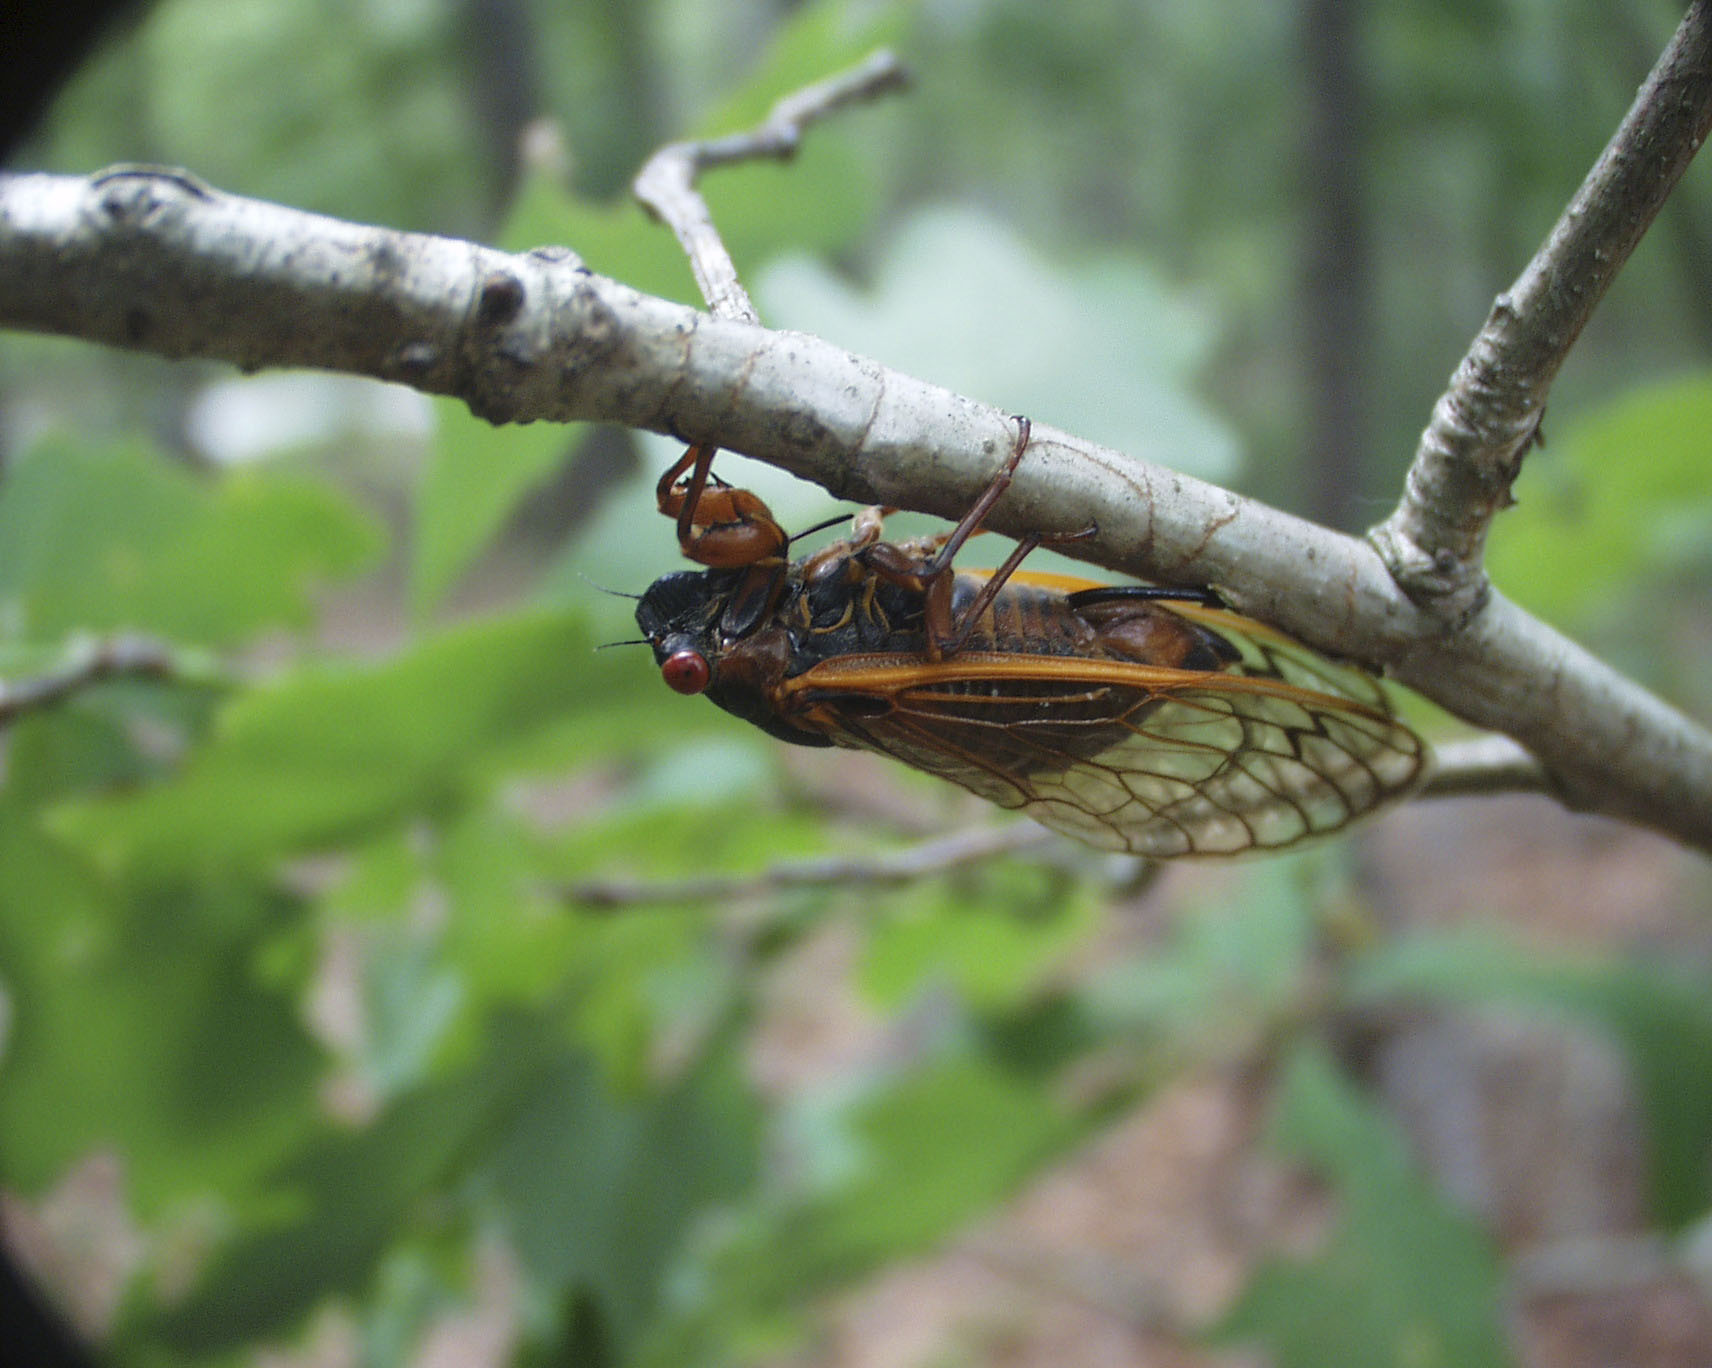 The cicadas with the red eyes are periodical cicadas, the same ones that will be emerging in large numbers this year in Maryland and some other areas. It is unlikely we’ll see them on Long Island.  These cicadas have a 17-year life cycle and emerge around late May to early June.    COURTESY DANIEL OWEN  GILREIN